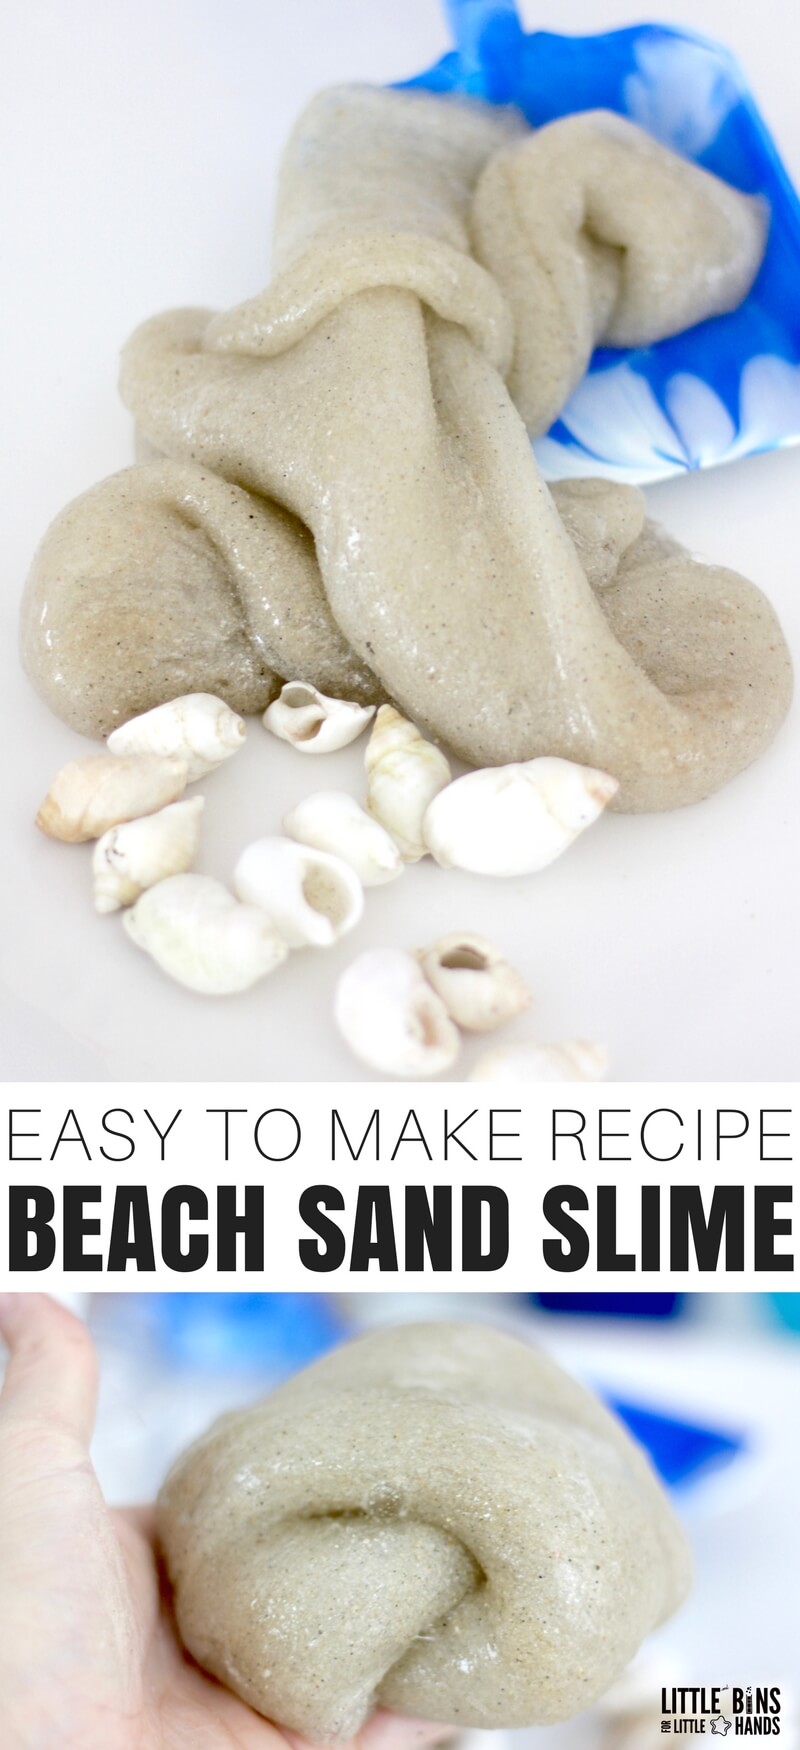 Bring the beach to your kitchen like we did with our awesome homemade sand slime recipe! Whether you use sand from the beach, sand box, or craft store, making sand slime is a hit with the kids. Whenever we go to the beach I like to take a little of it home with me. Use one of our basic slime recipes to make the coolest beach or ocean theme slime ever.